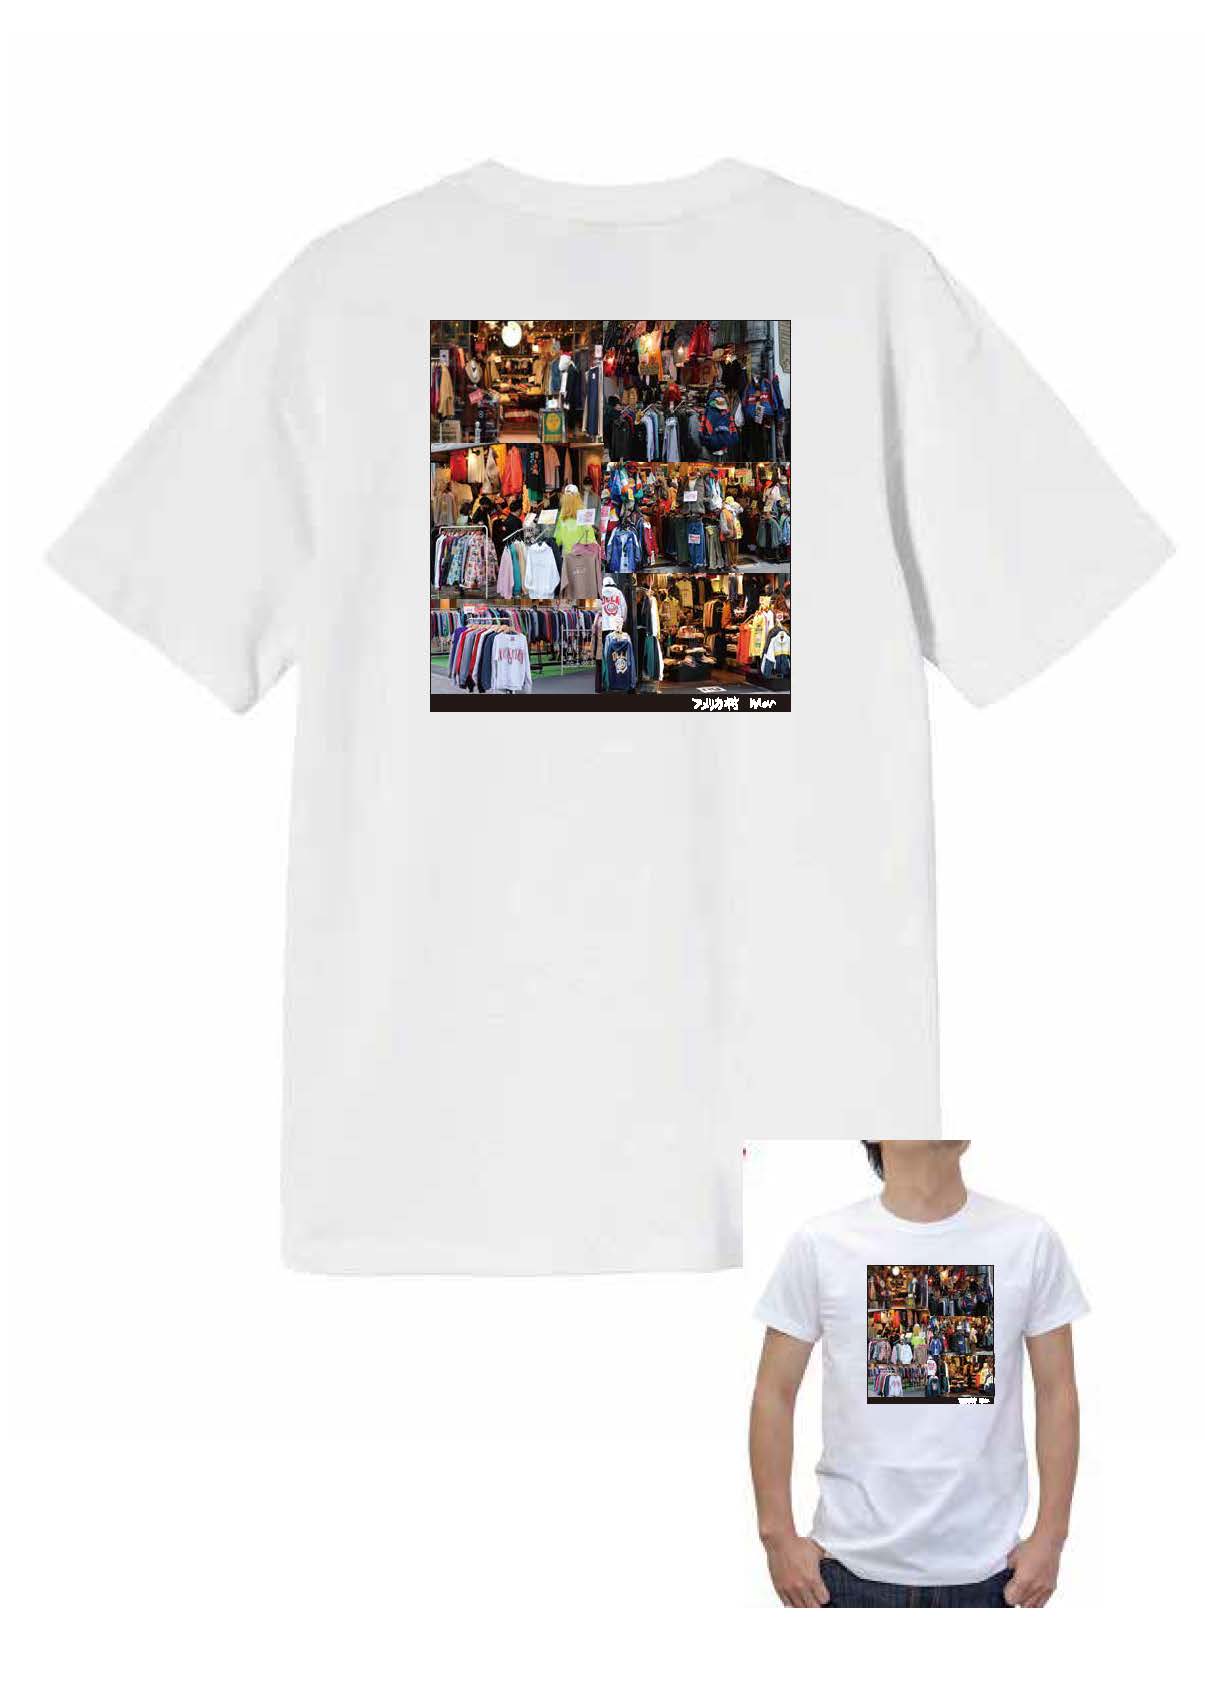 art in the store-１アメ村アートTシャツ